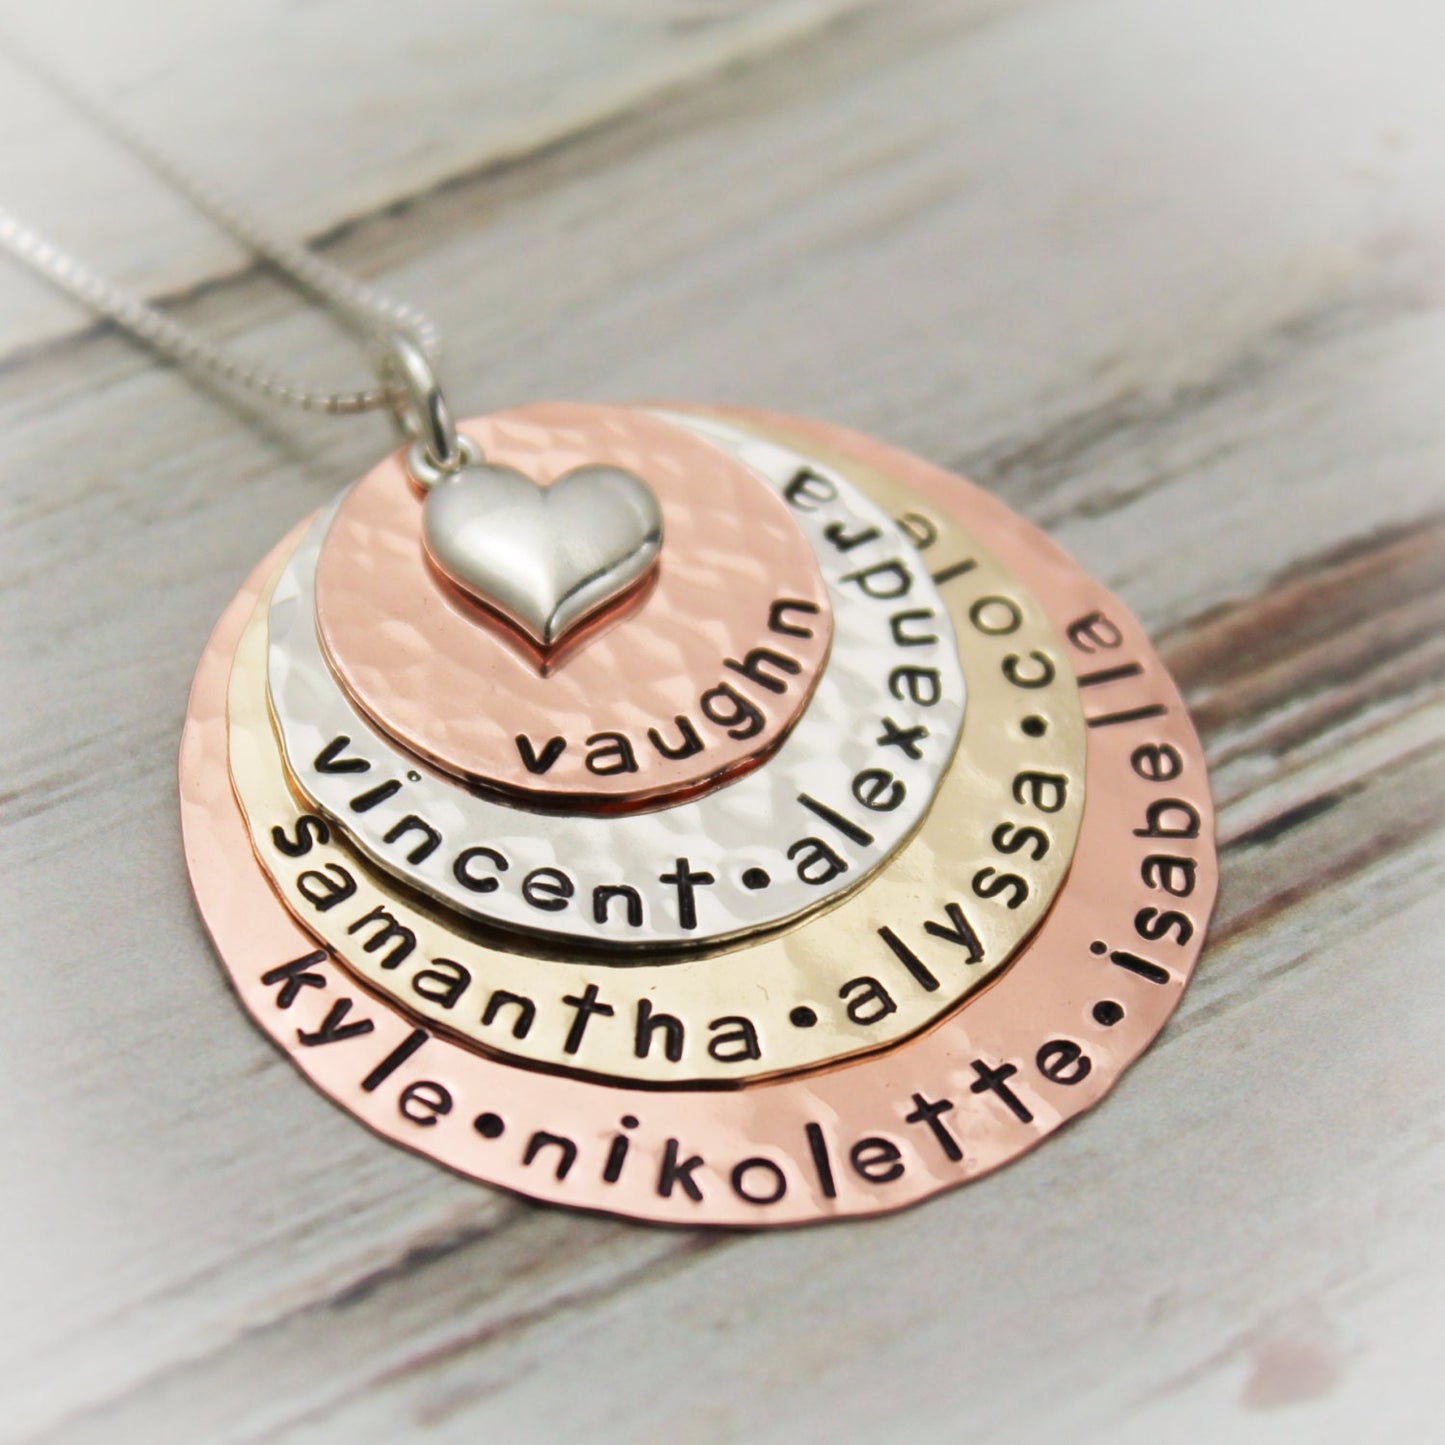 Grandmother Layered Mixed Metals Necklace Personalized Hand Stamped Jewelry